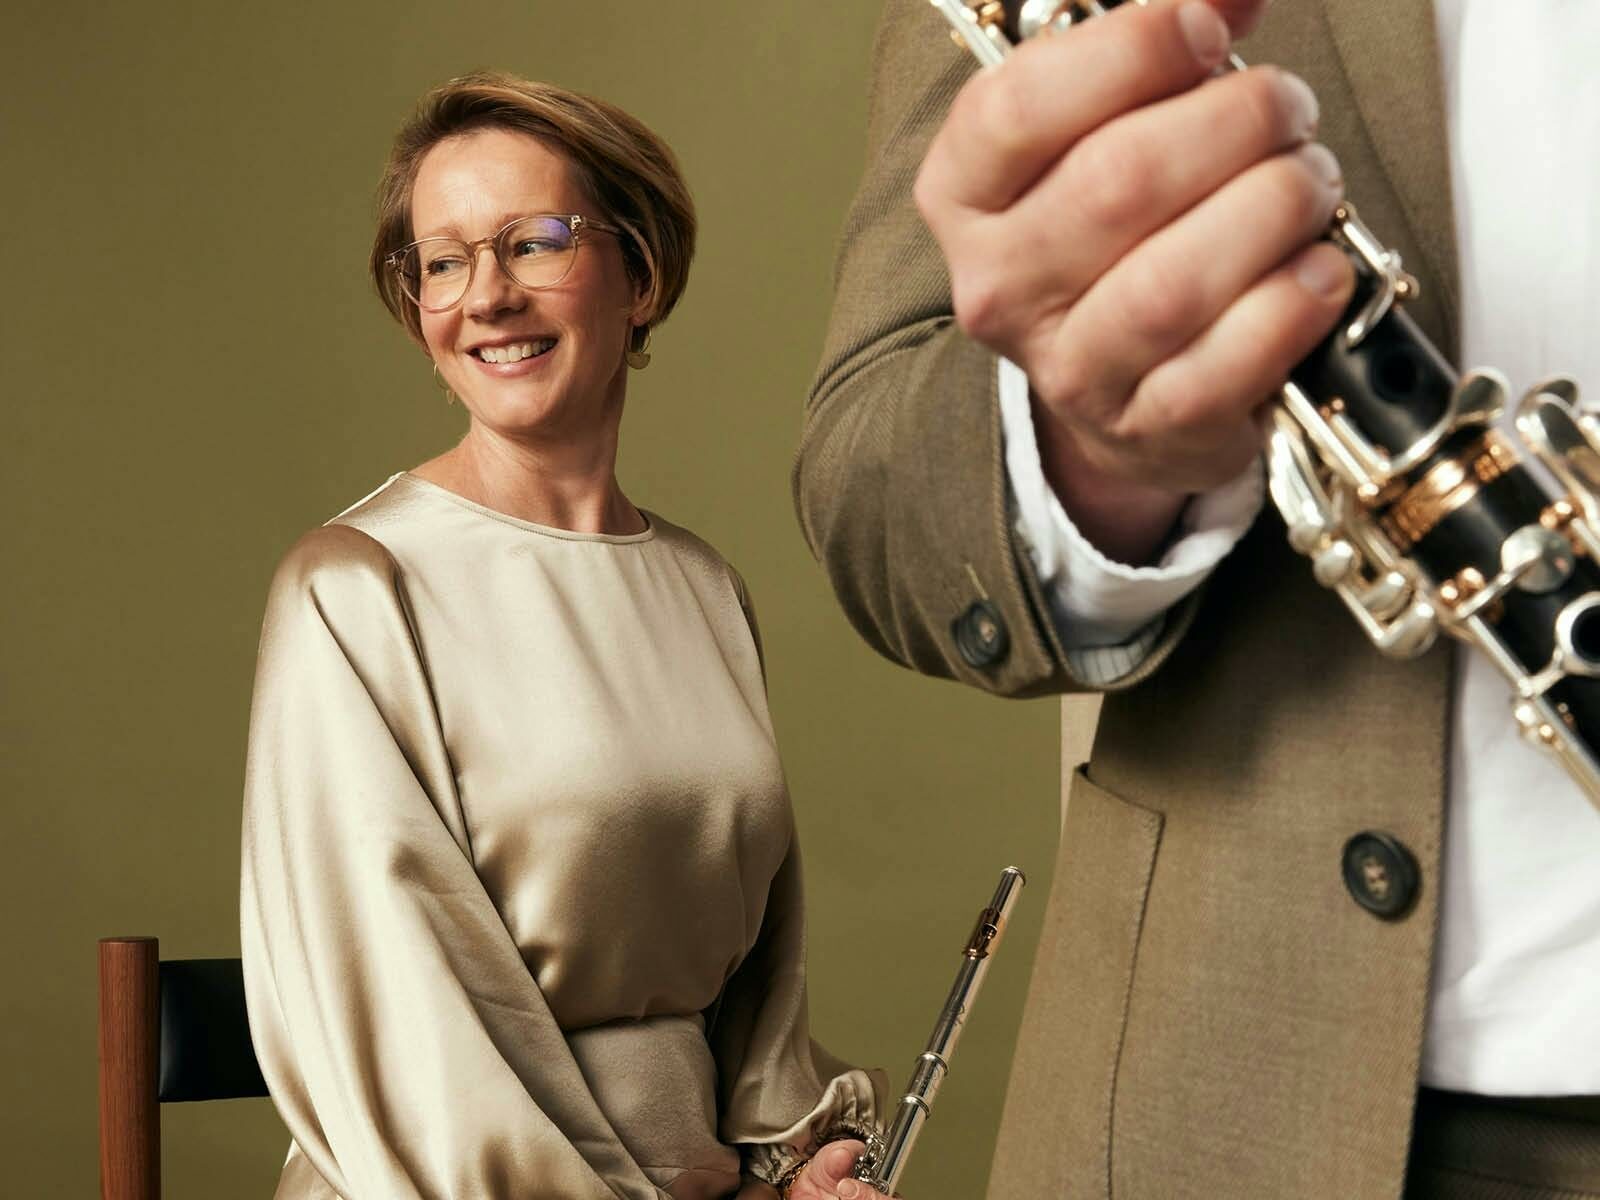 A woman in a Champane colour dress, sits, holding a flute with part of a clarinet and hand visable